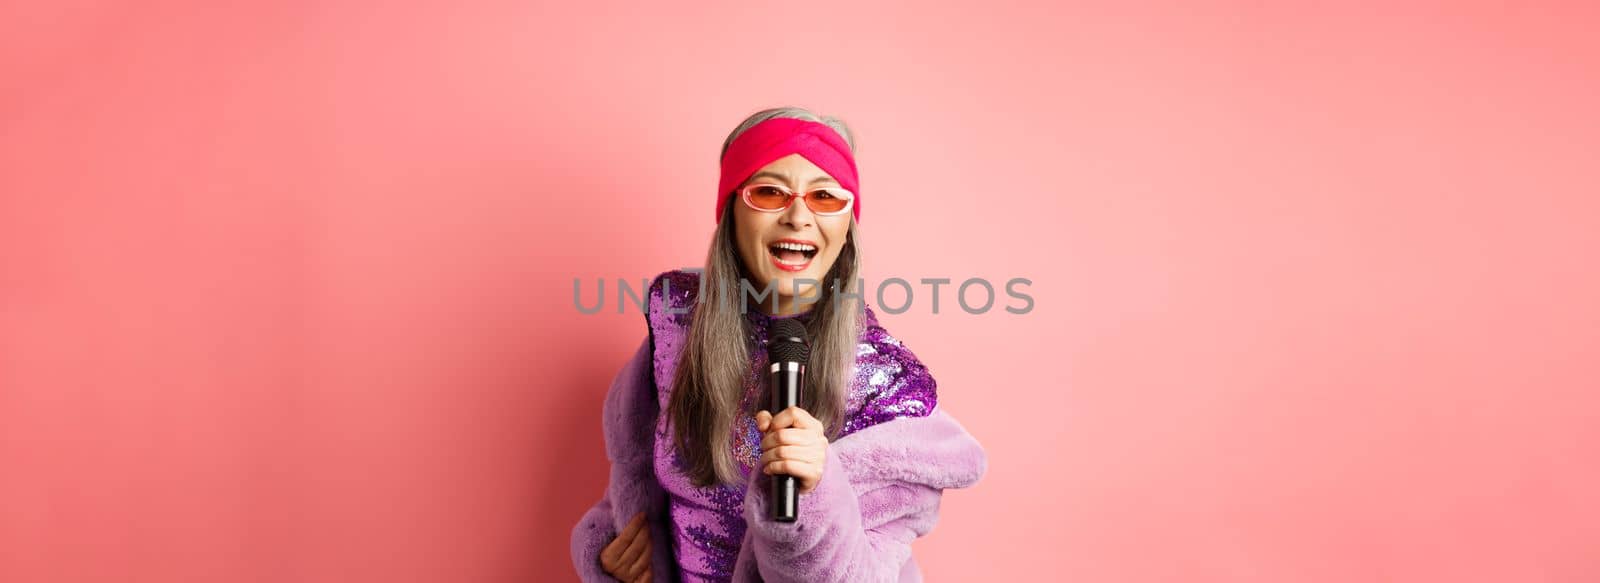 Fashion and lifestyle concept. Beautiful middle-aged woman in sunglasses, party dress and faux fur coat, singing in microphone and having fun at karaoke bar, pink background.